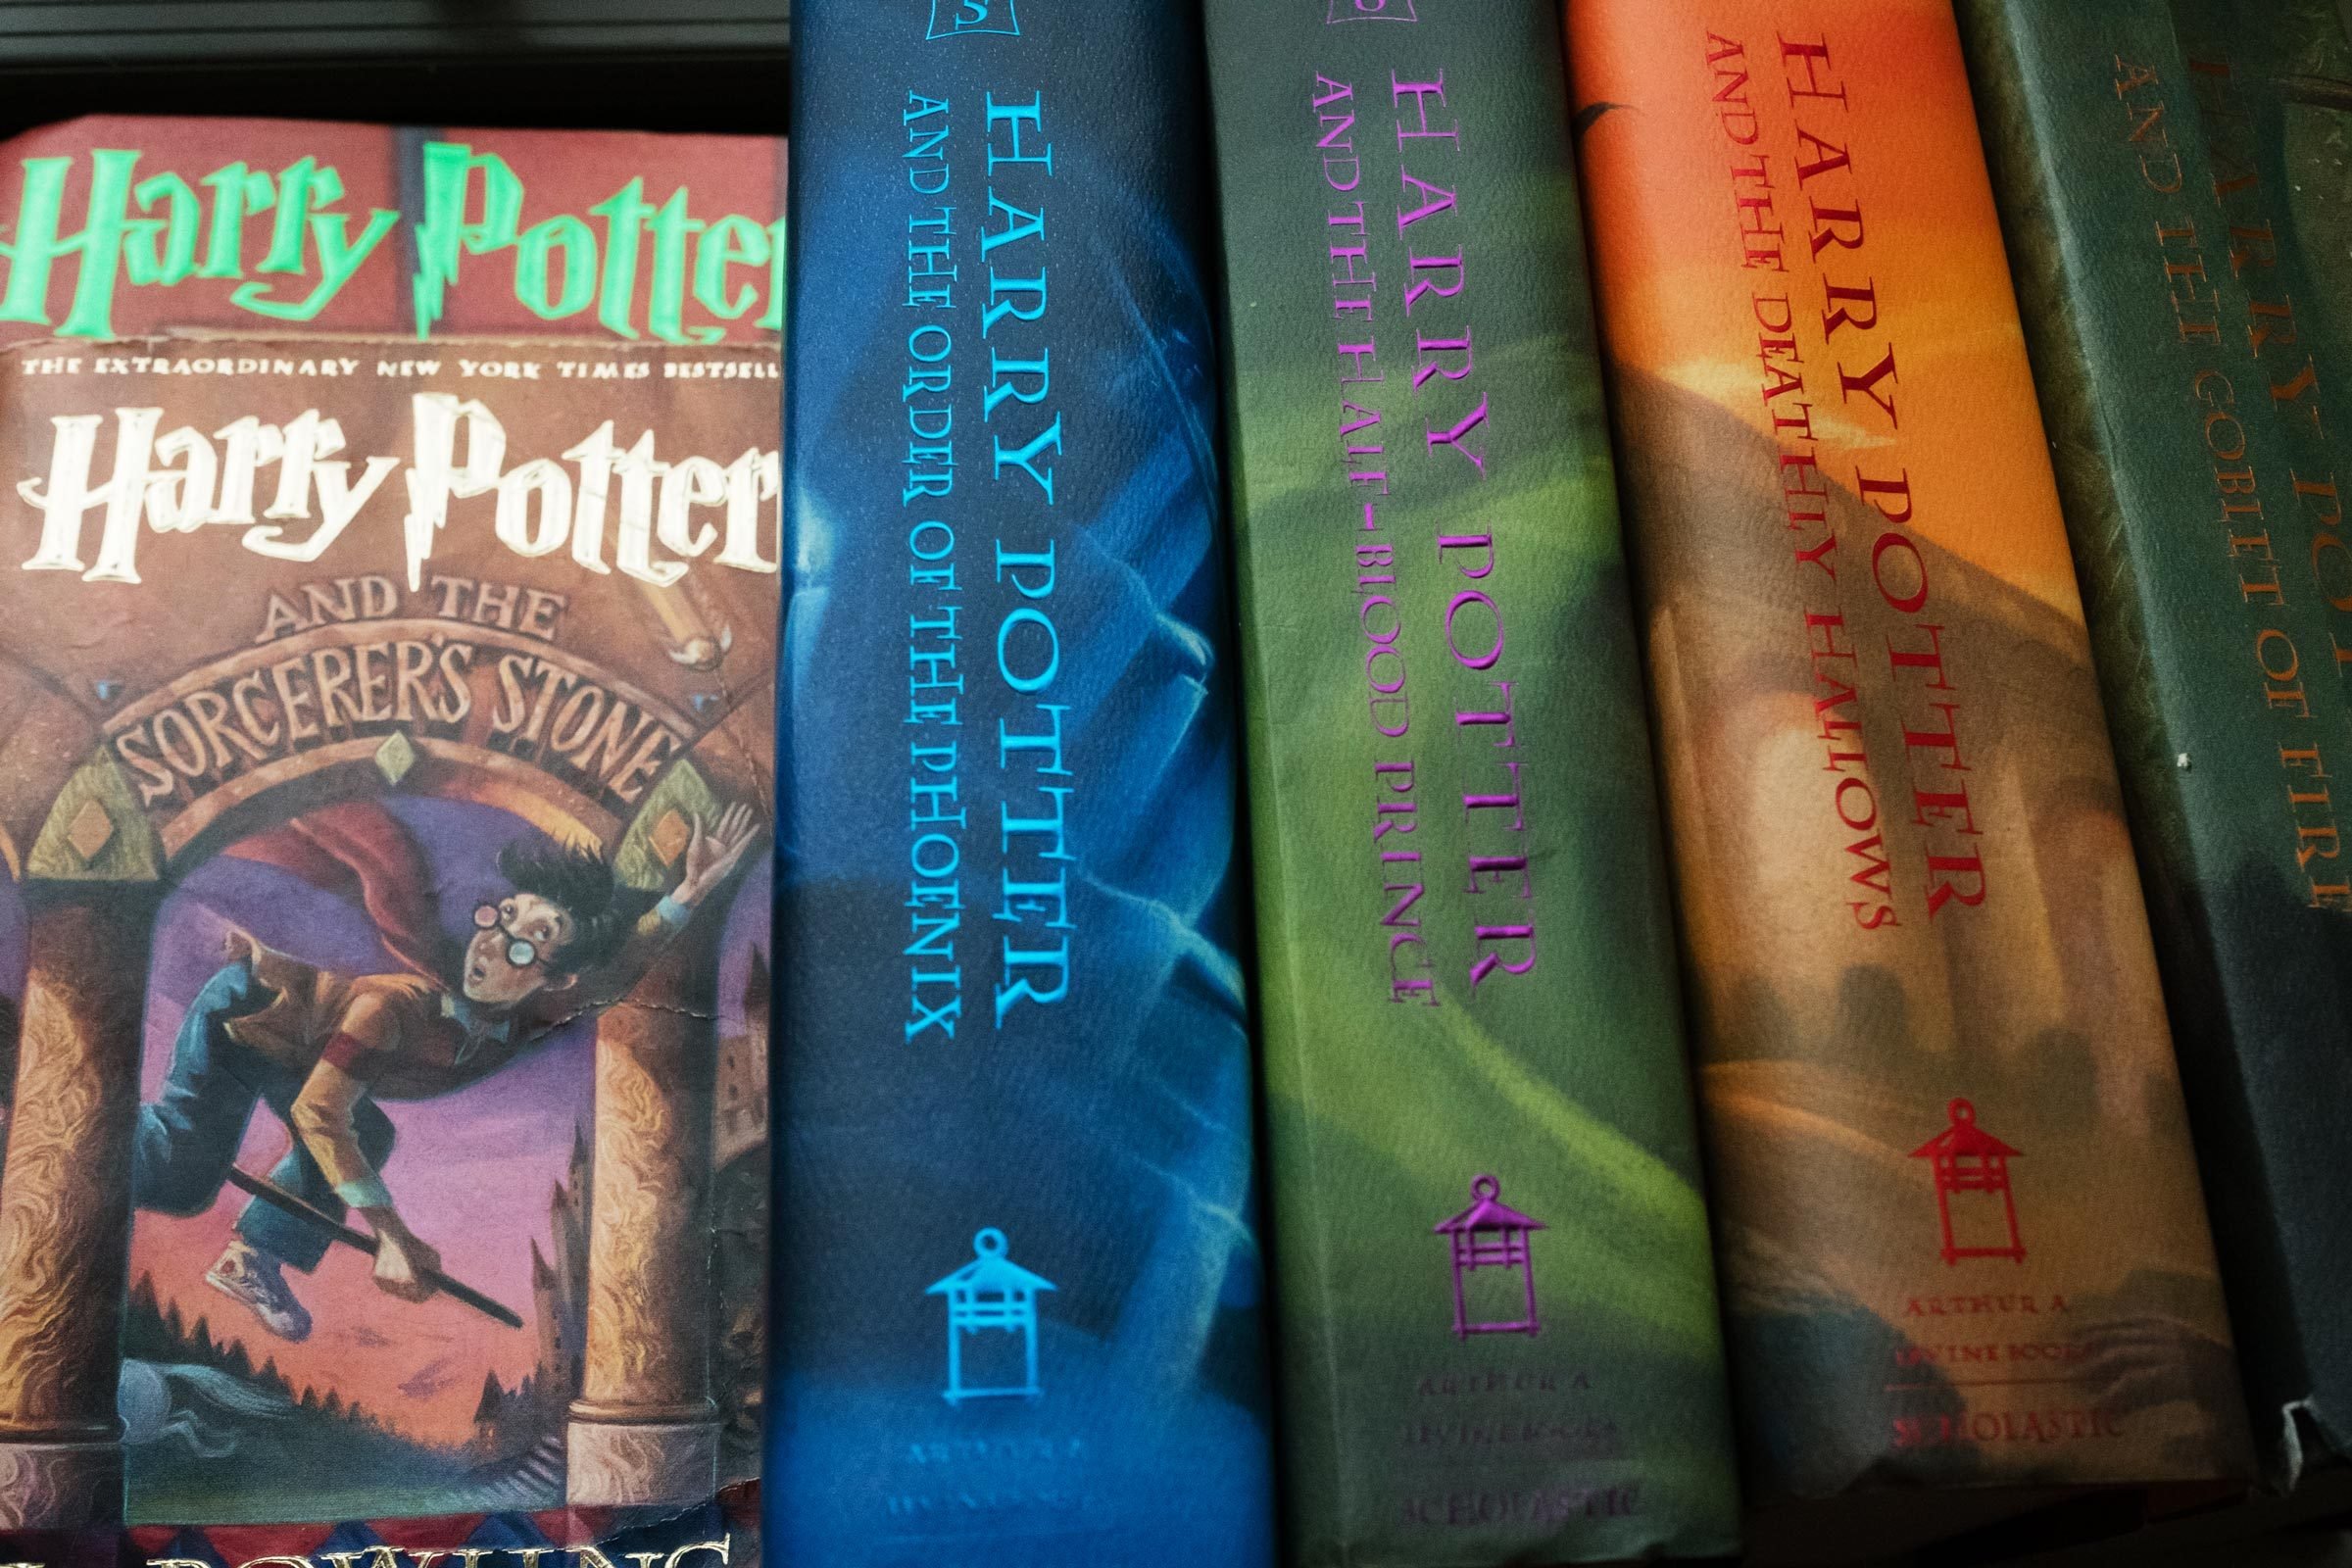 Details You Missed the First Time You Read Harry Potter | Reader's Digest